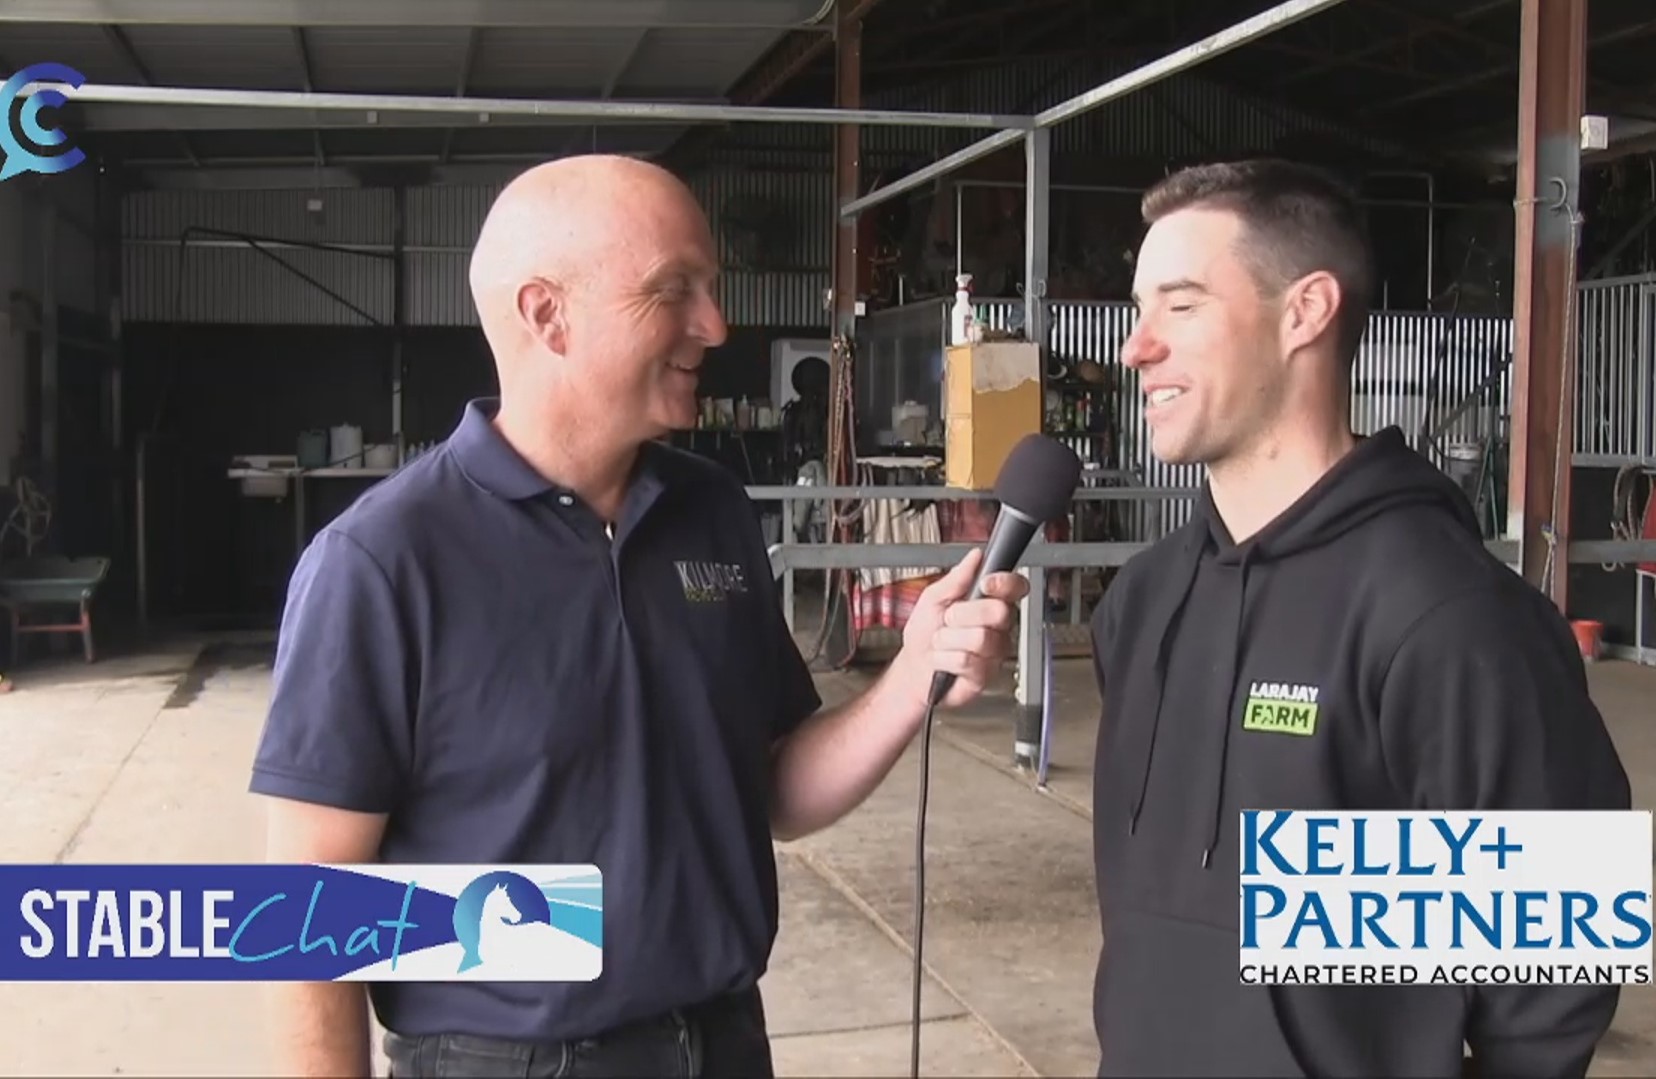 You are currently viewing 1: Stable Chat with Greg Sugars from Larajay Farm